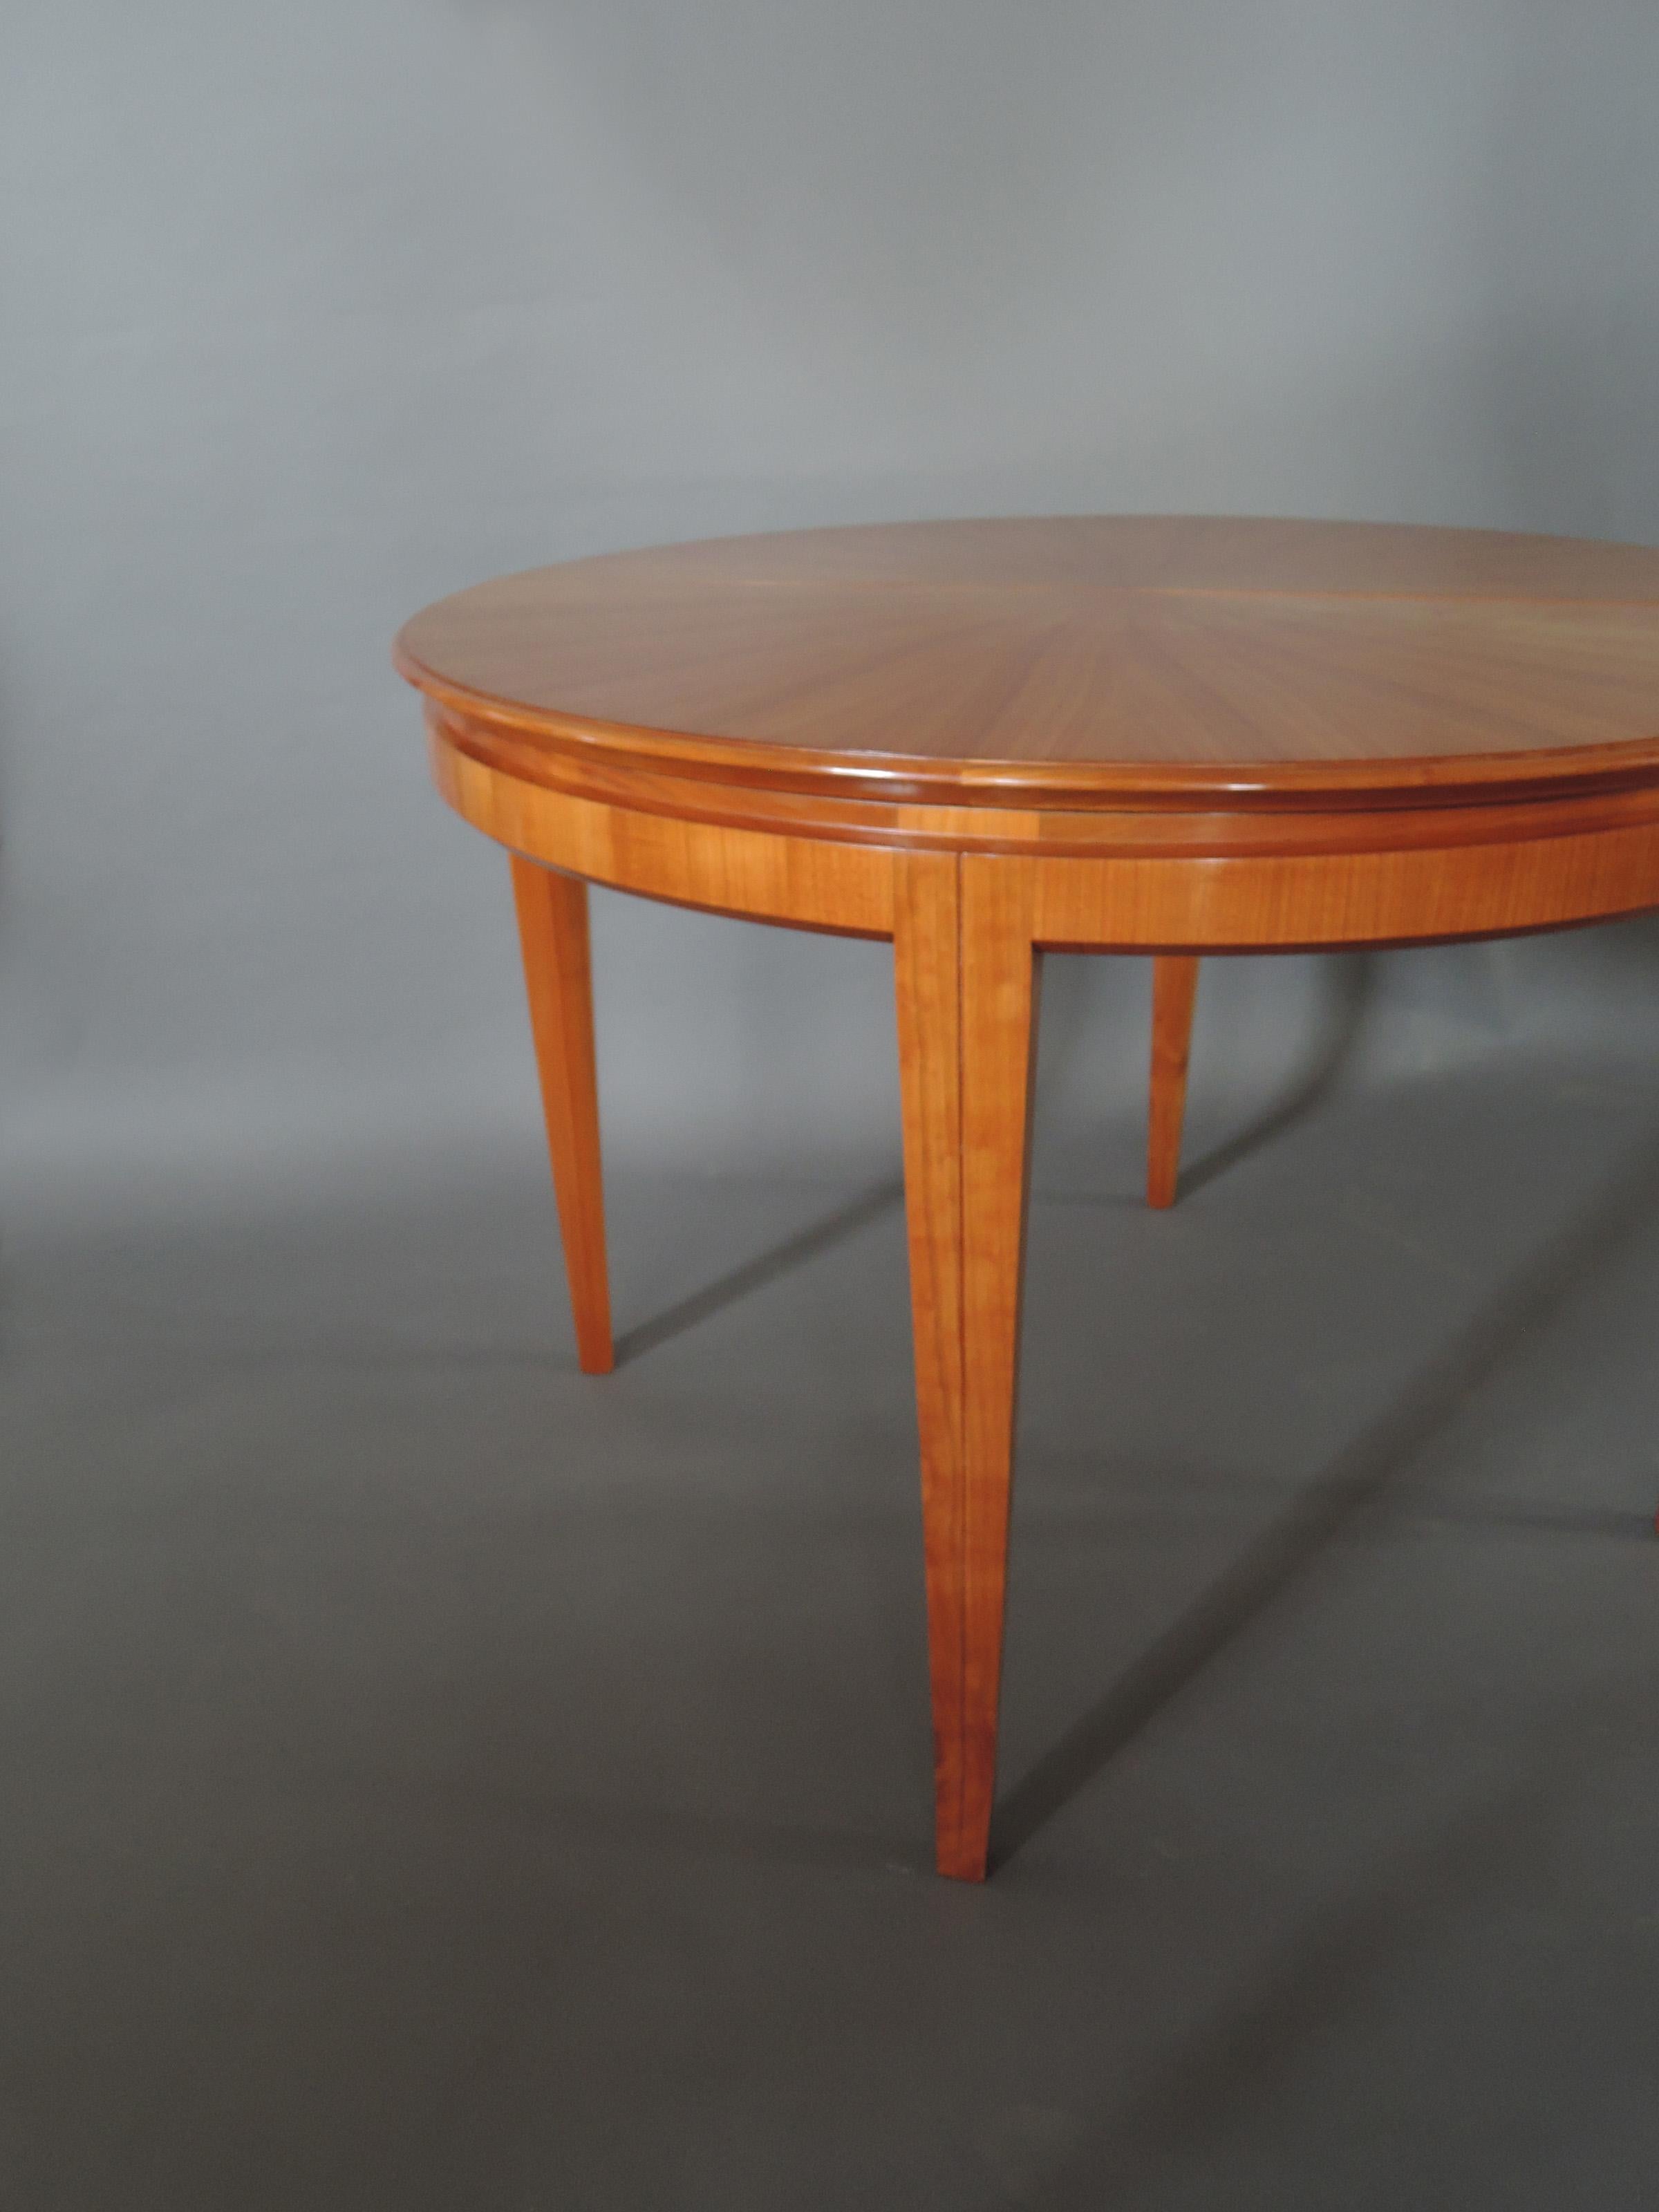 French 1950s Cherry Round Dining Table Divisible in 2 Demilune Tables For Sale 4